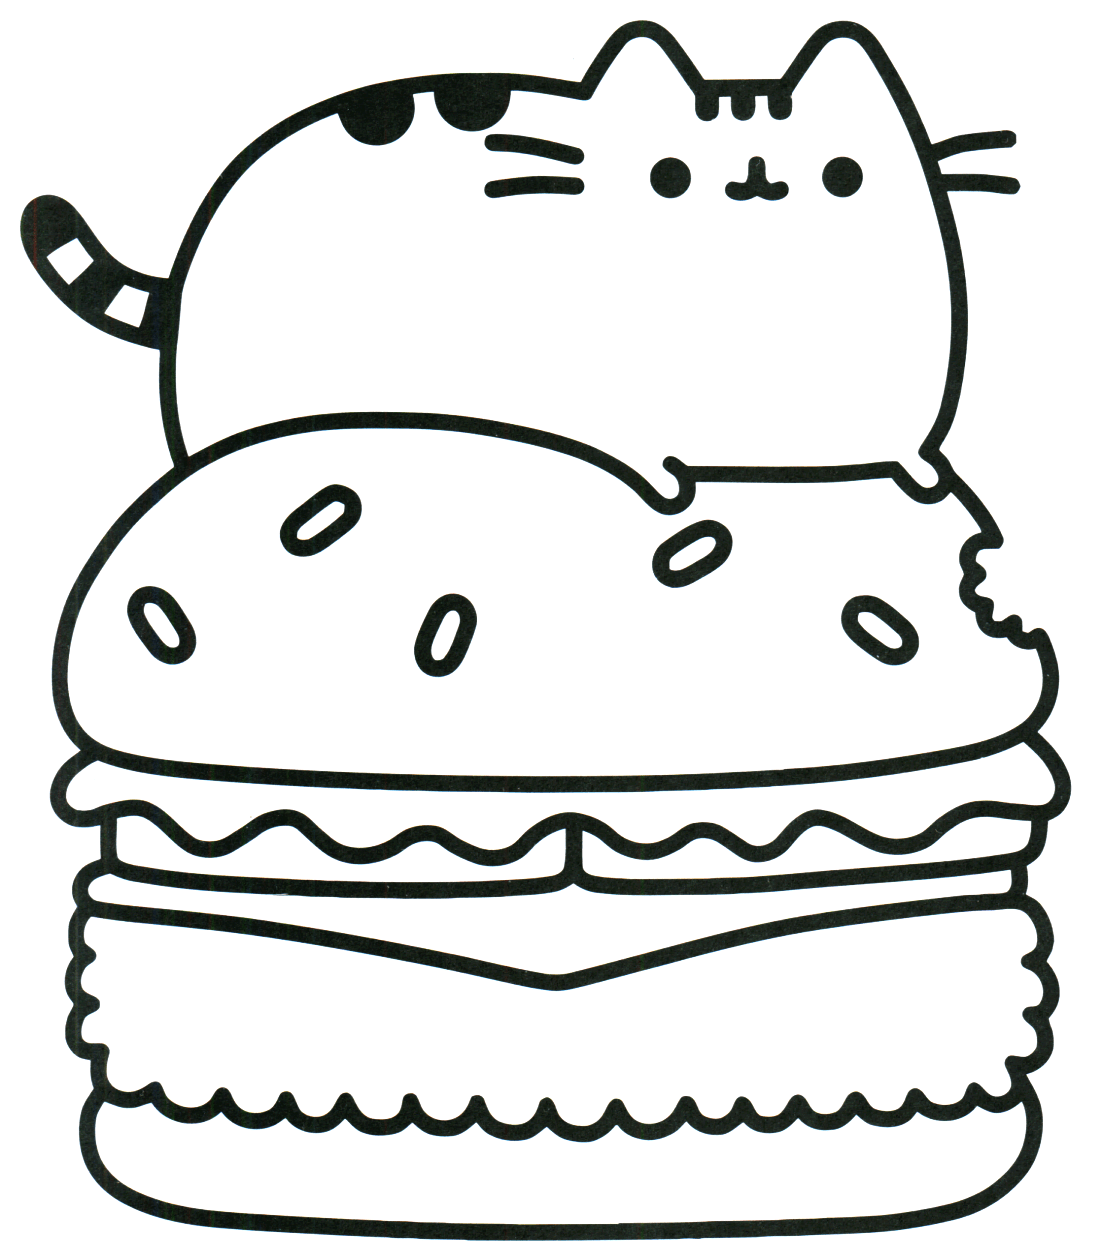 Pusheen On Hamburger Coloring Page   Free Printable Coloring Pages ...